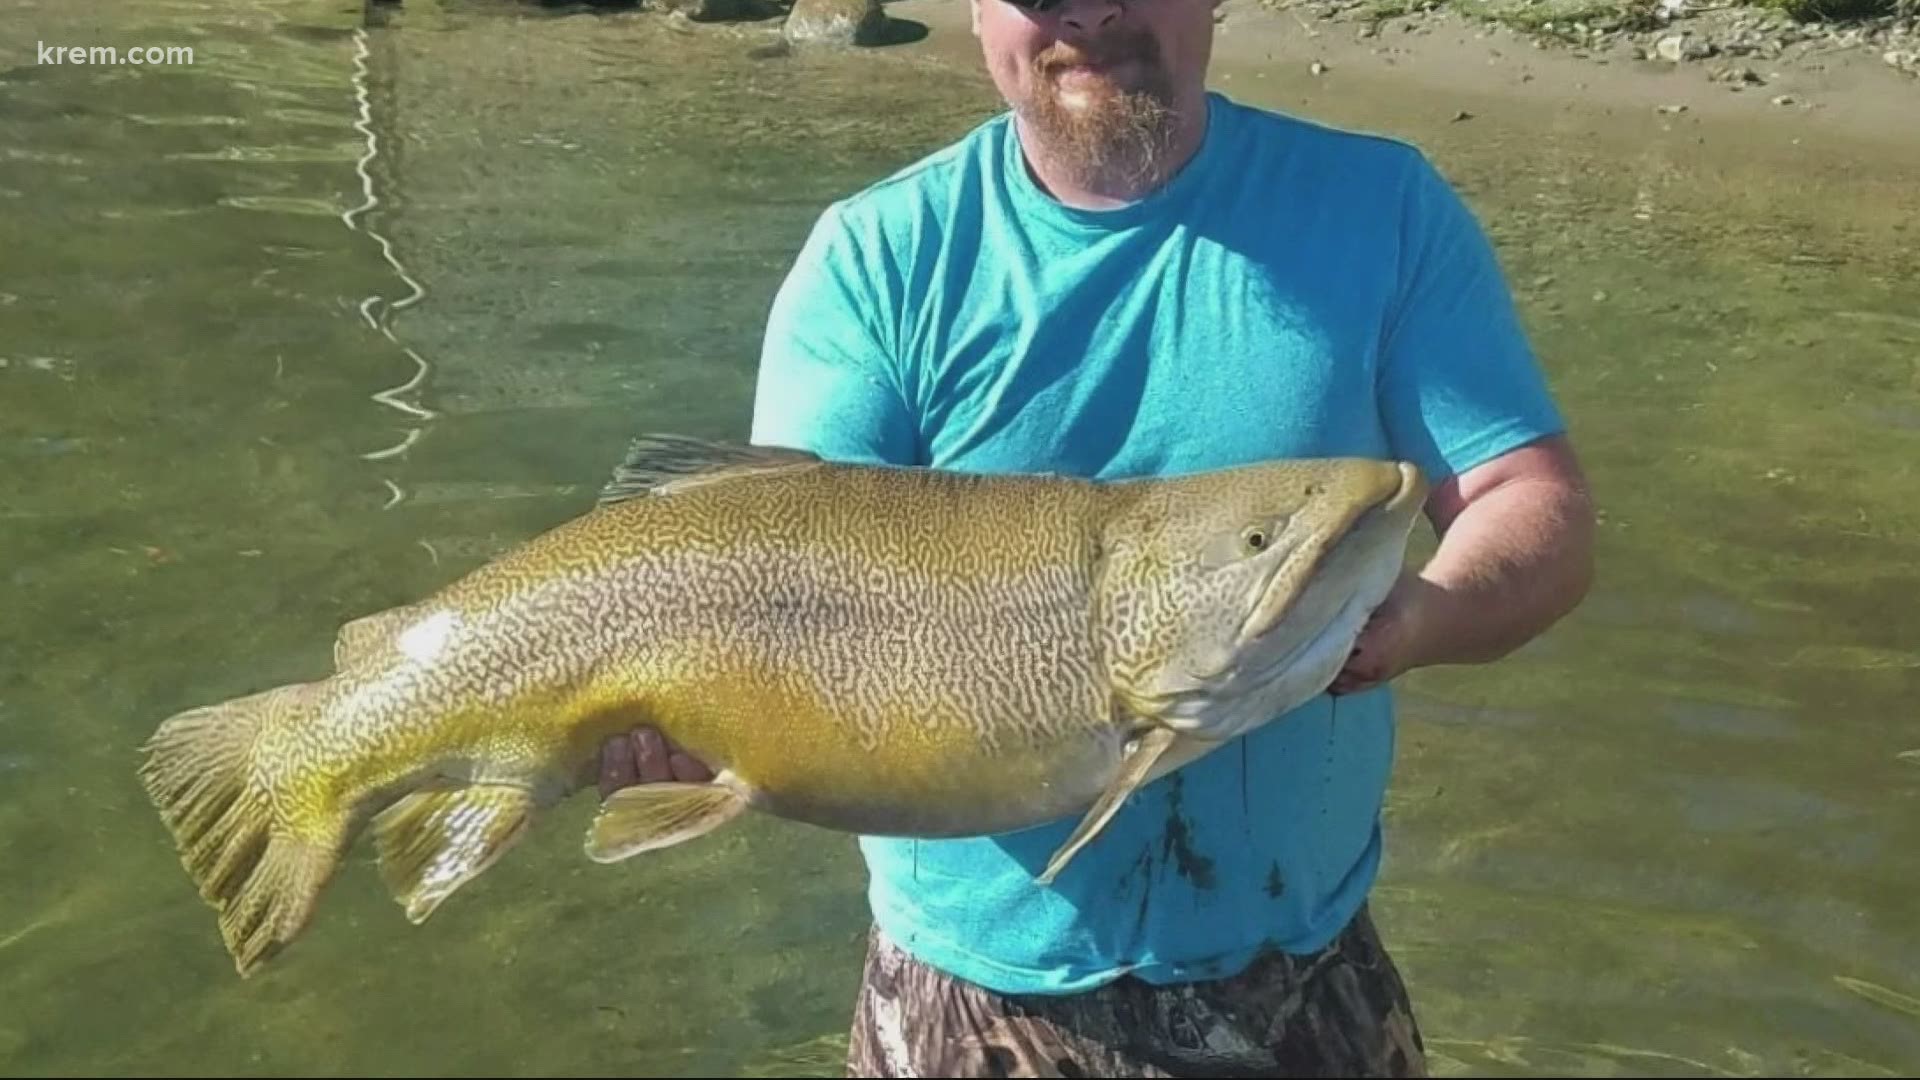 Angler Caylun Peterson caught the 24.49-pound tiger trout on June 26. The fish pulled from the lake in late June shattered a Washington state record.